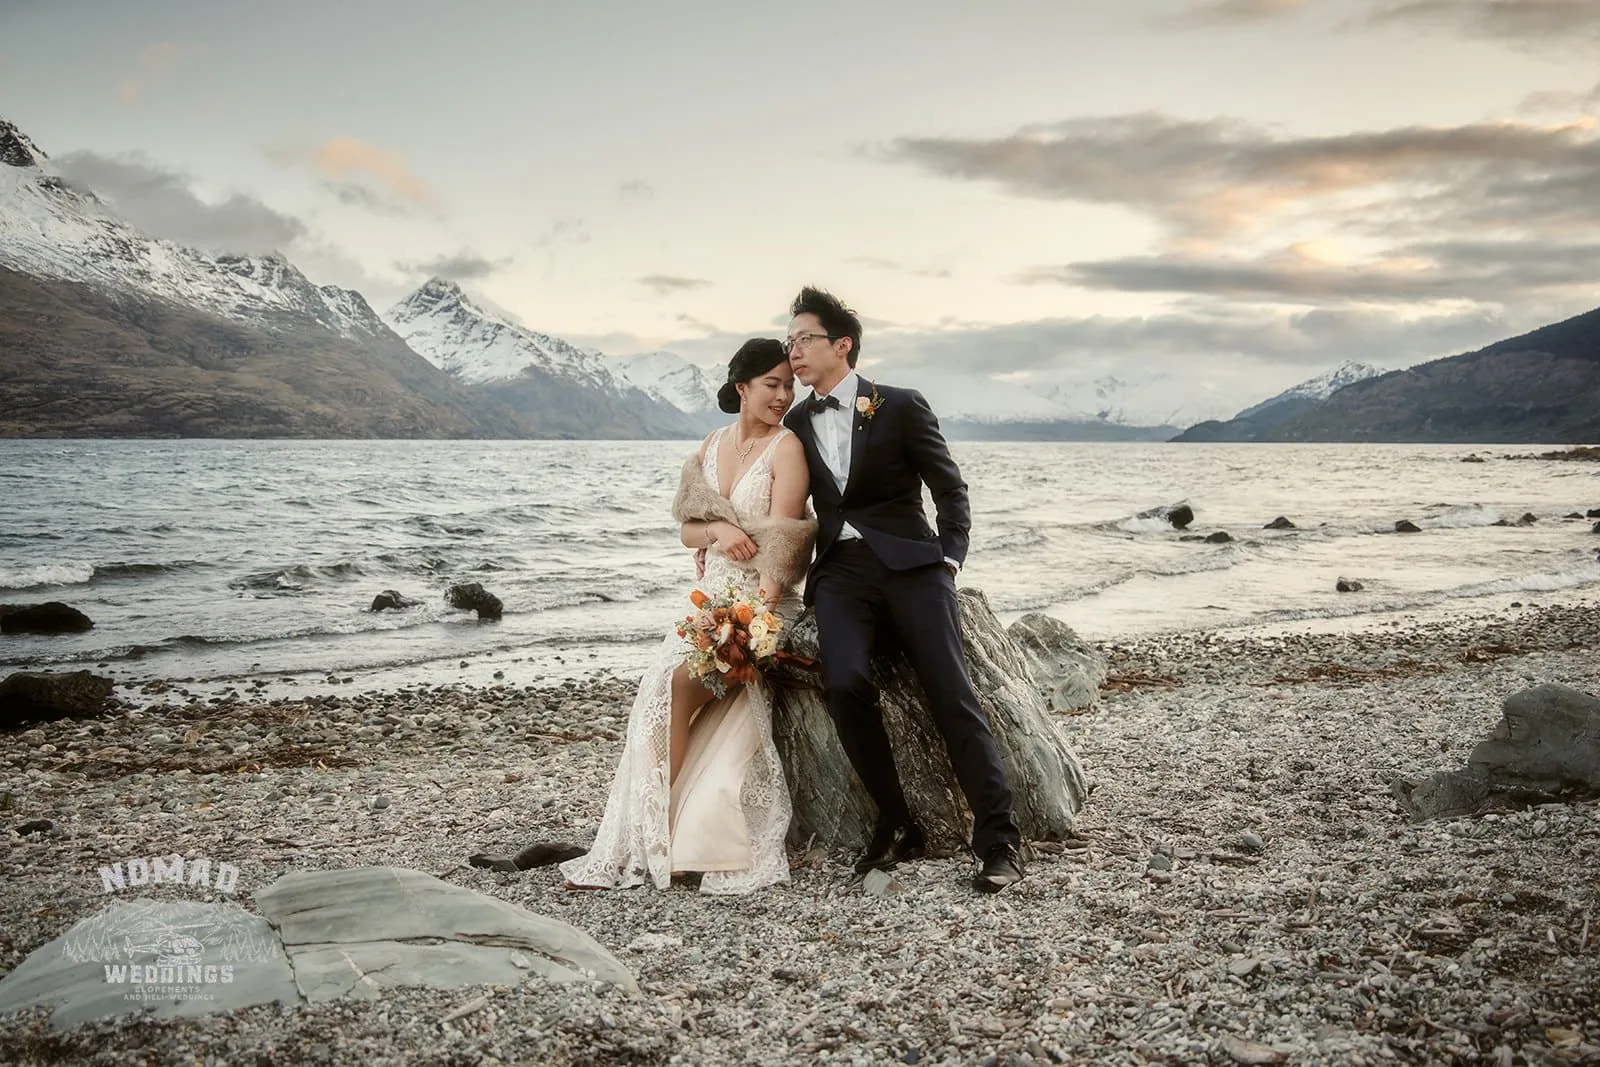 Joanna and Tony, the bride and groom, posing in Queenstown, New Zealand during their pre-wedding shoot near a lake.